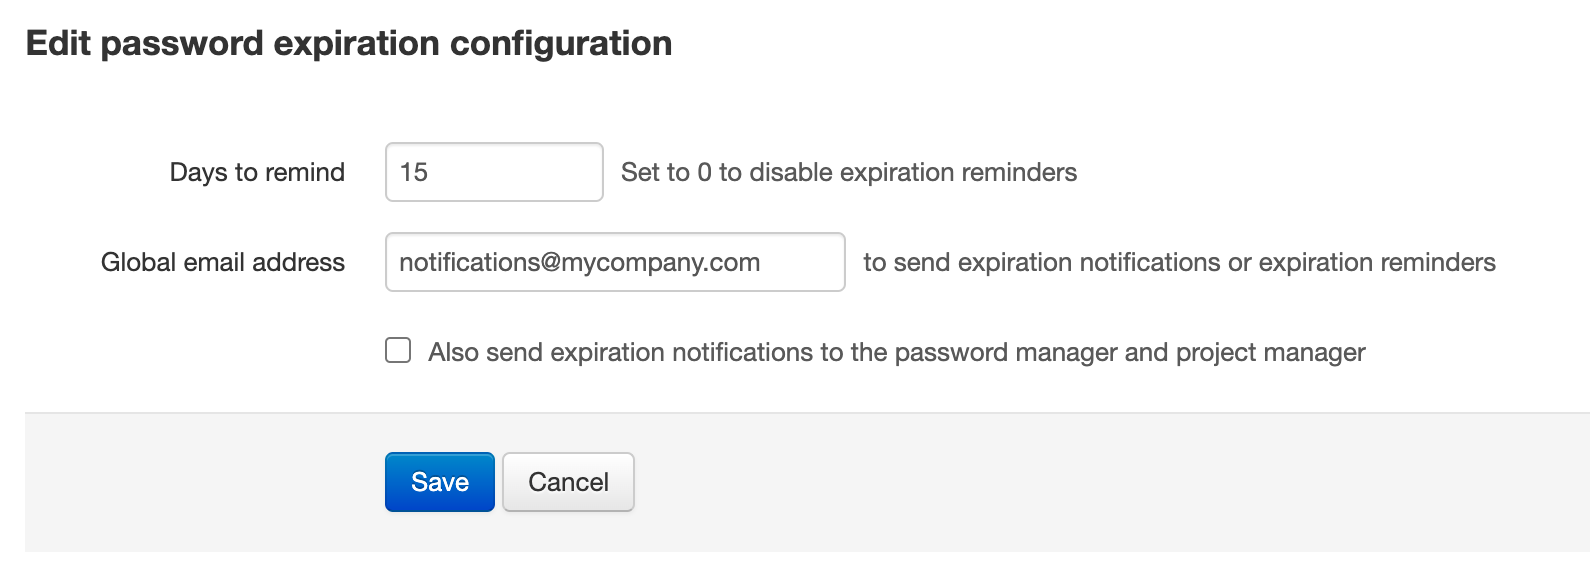 Edit global expiration notification email